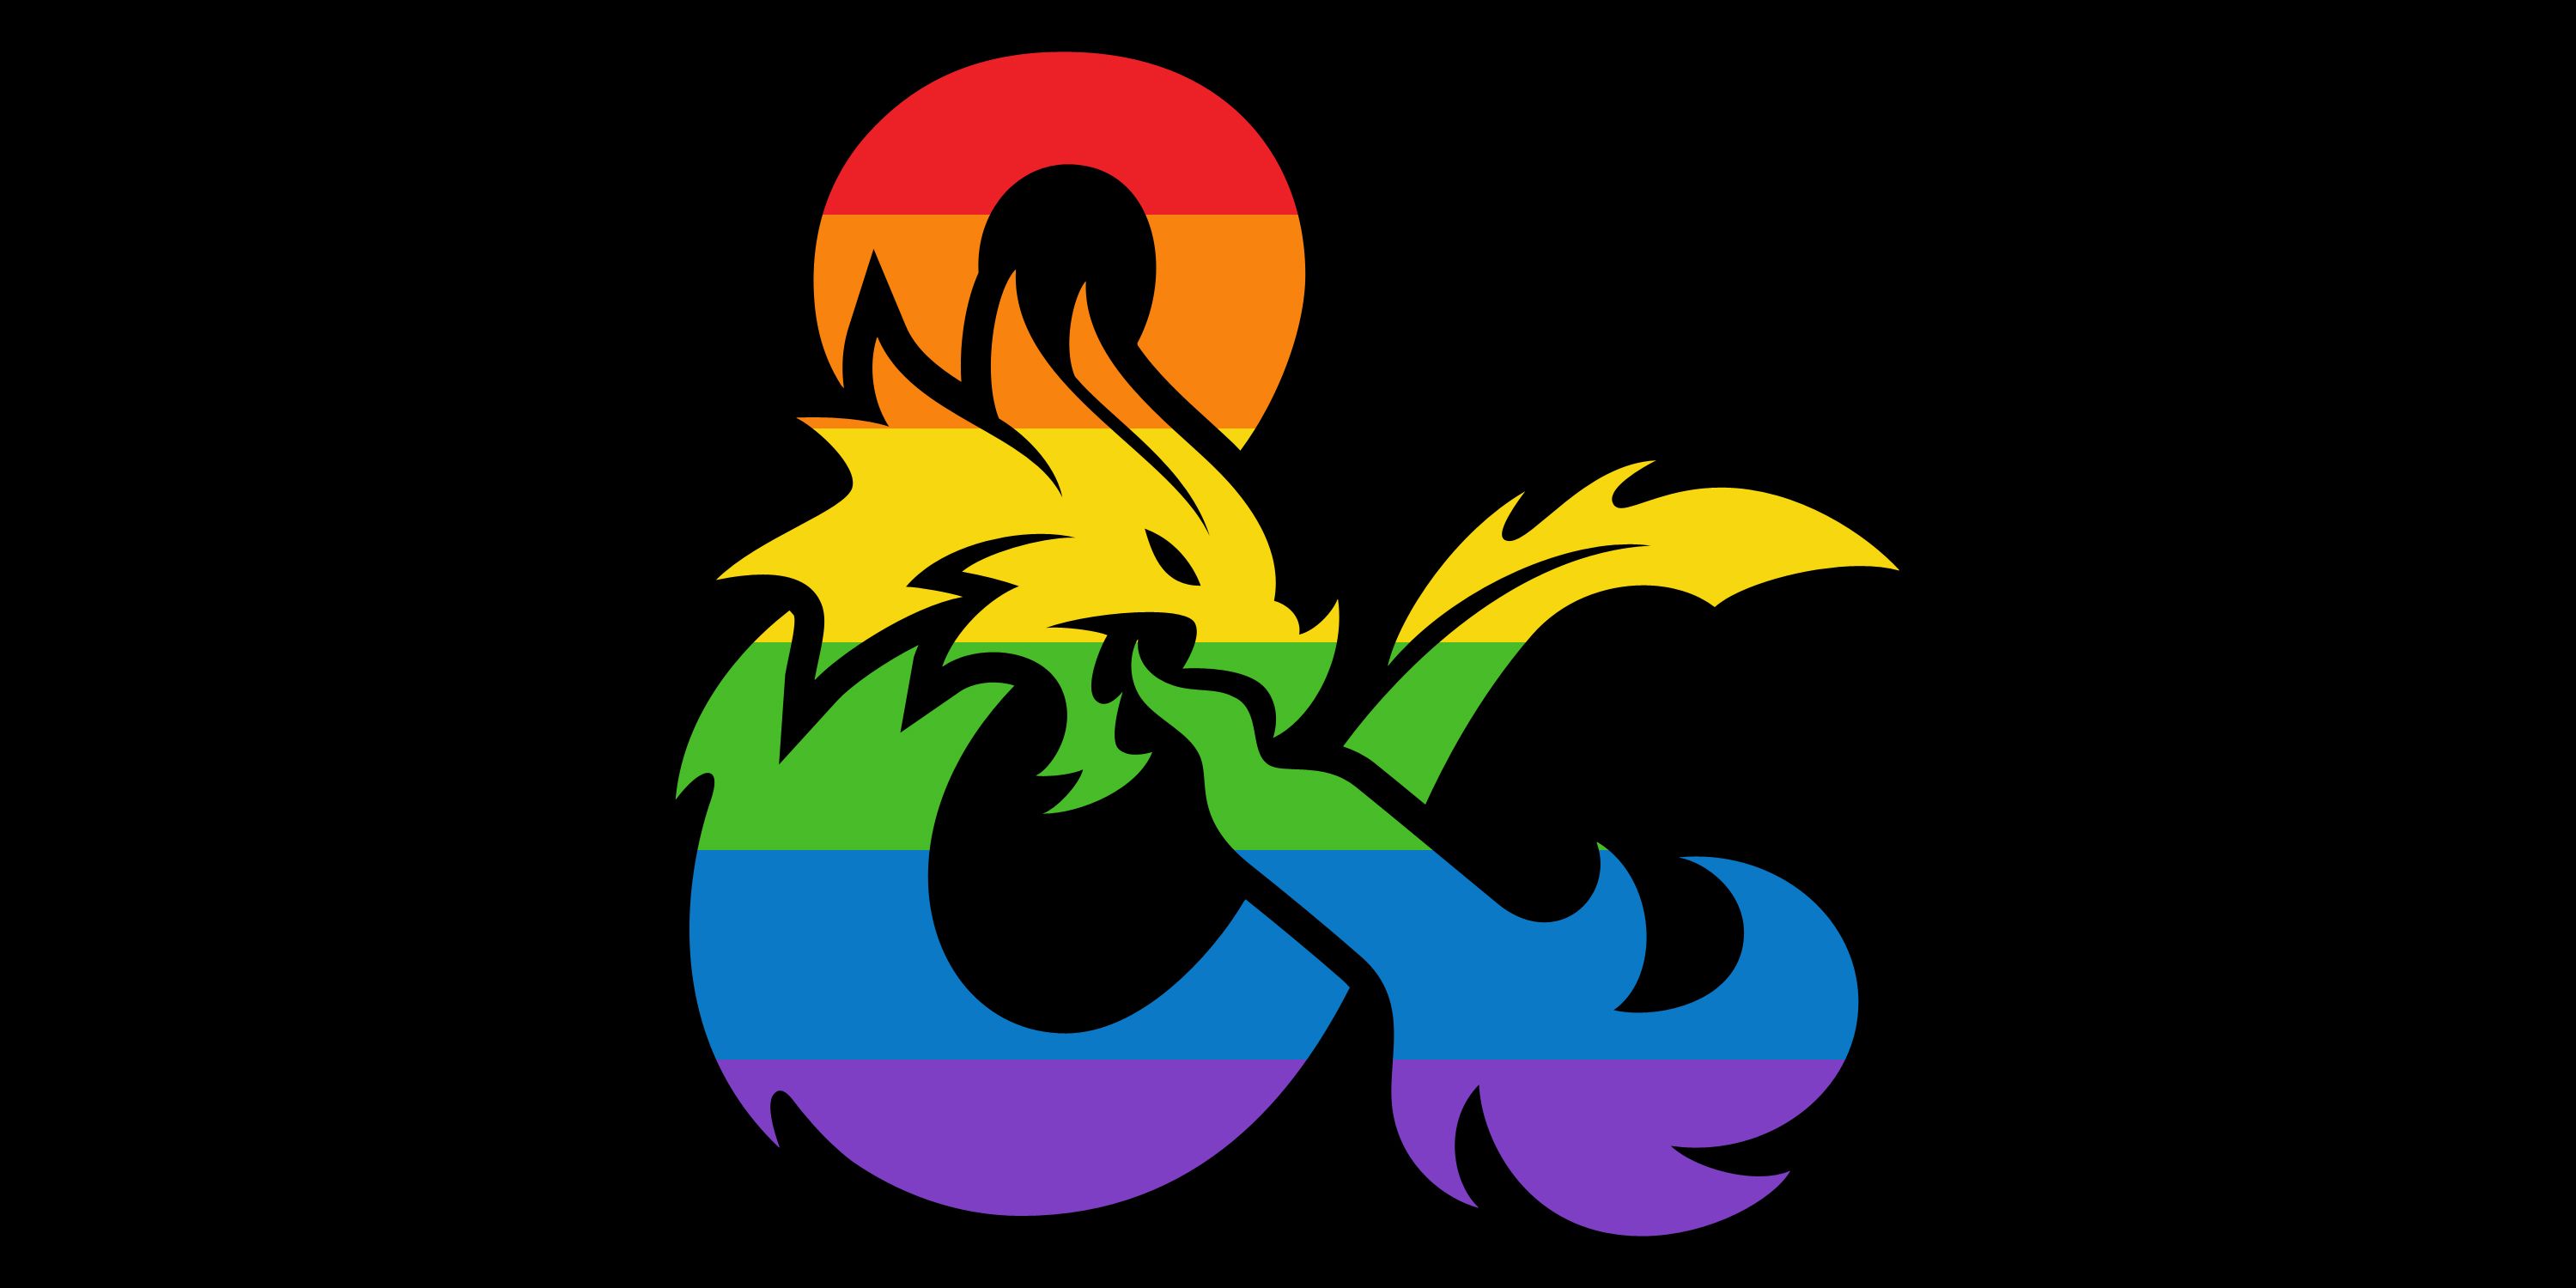 The D&D Logo in Pride colors